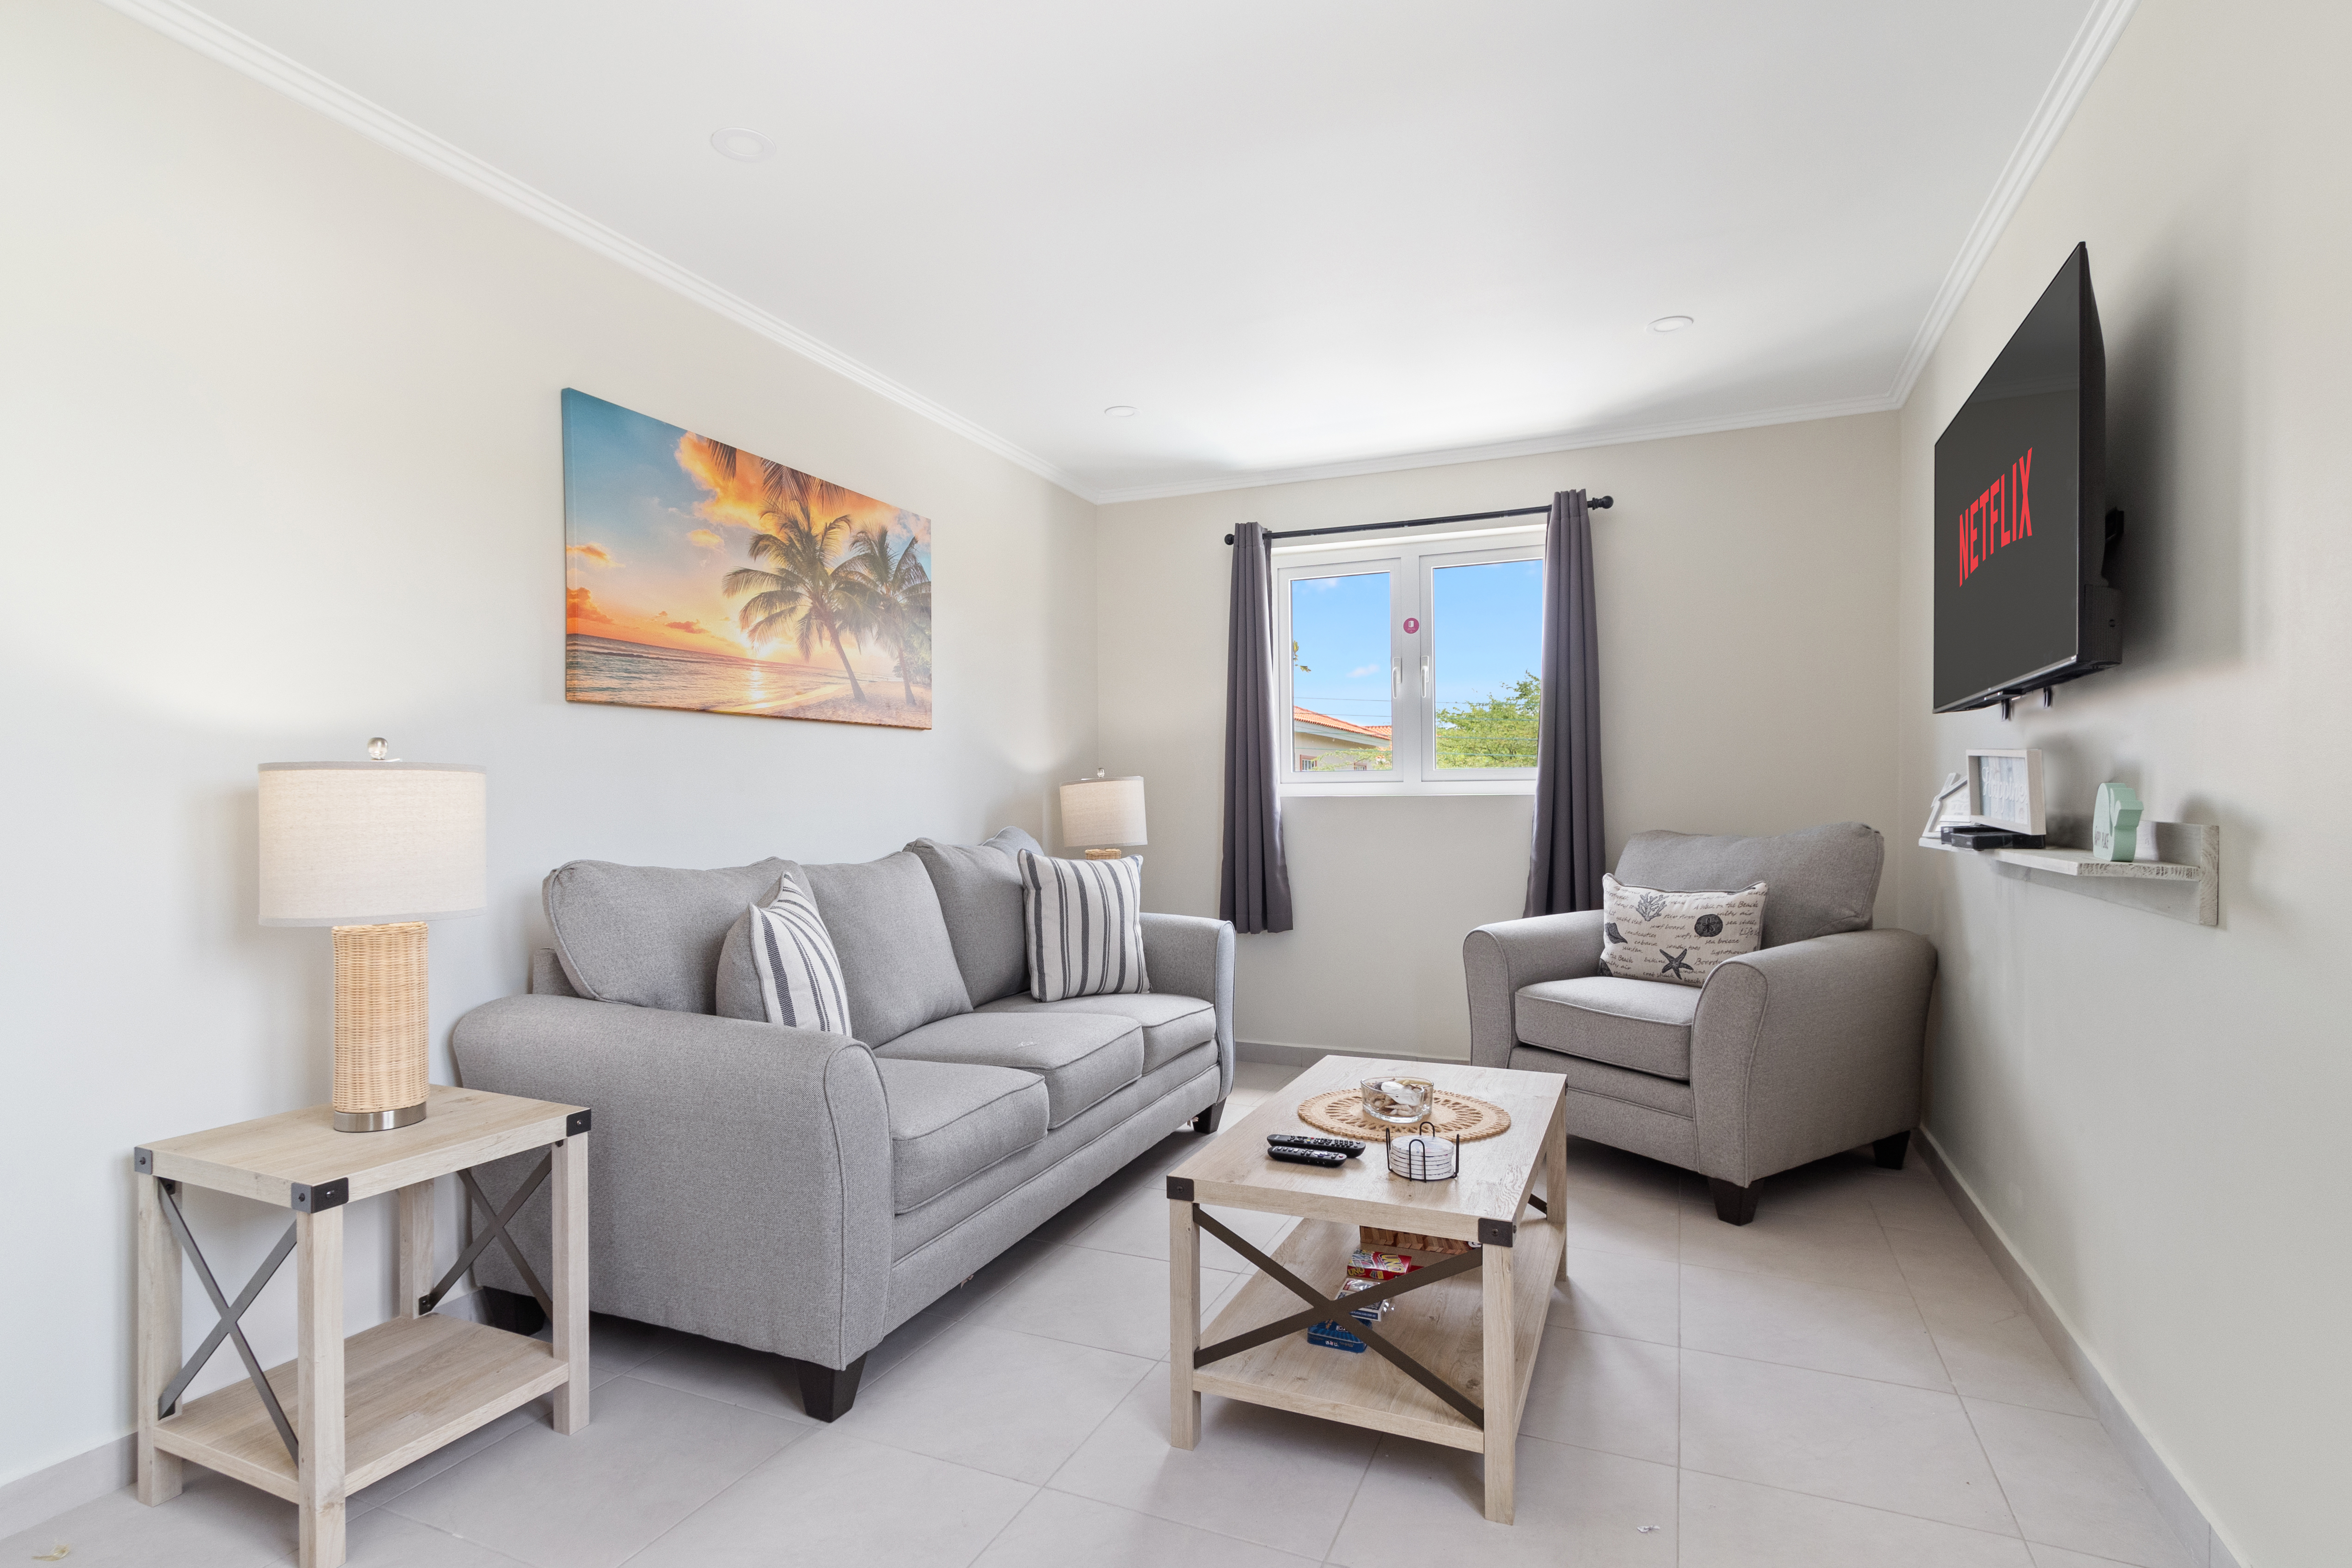 Comfortable Living area of Apartment in Noord Aurba - Living area is fully furnished with luxurious amenities. - SmartTV with Netflix - Beautifully designed space - Comfy Sofas